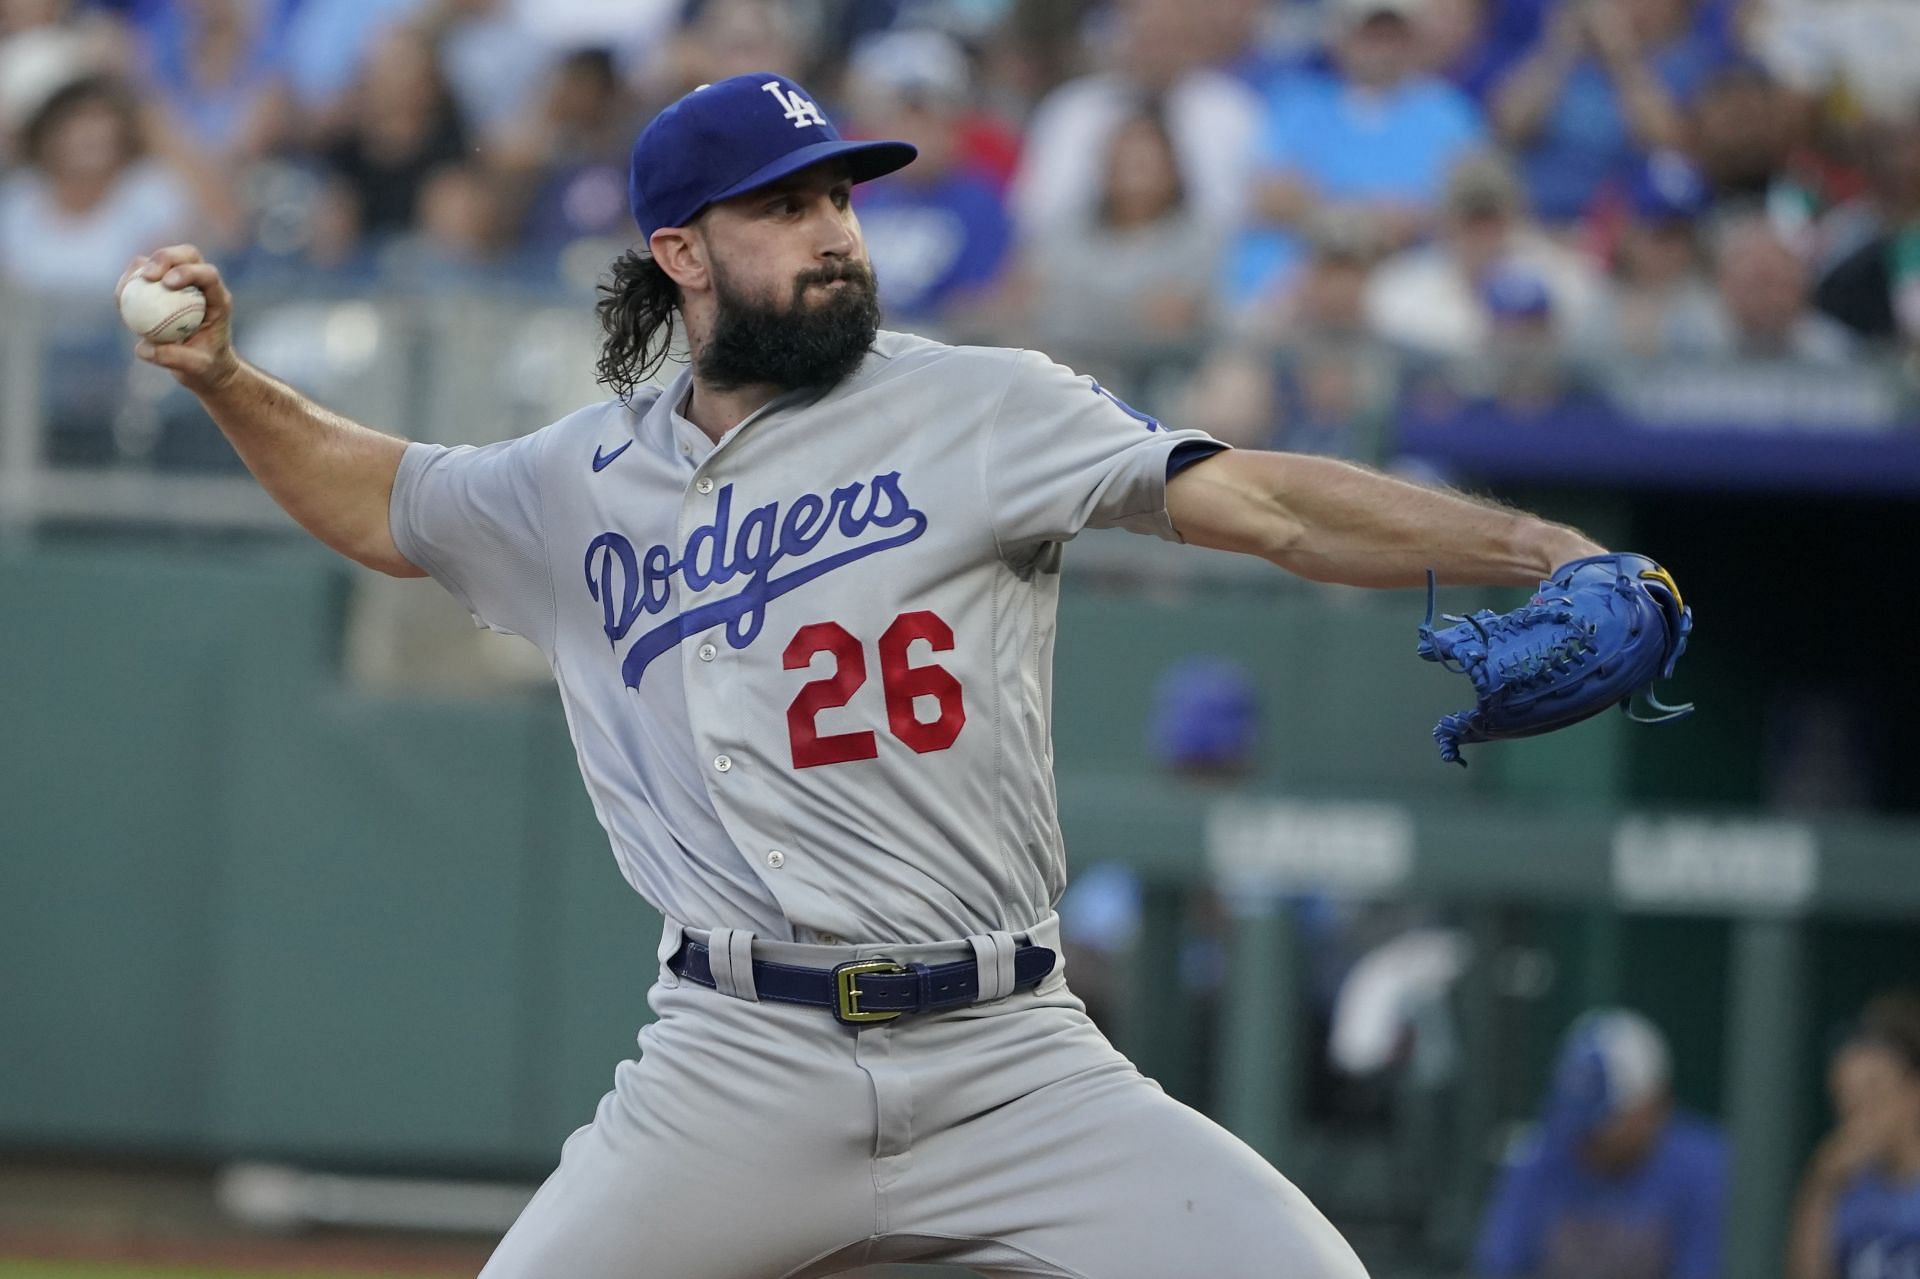 Dodgers fans have mixed emotions about Tony Gonsolin re-signing